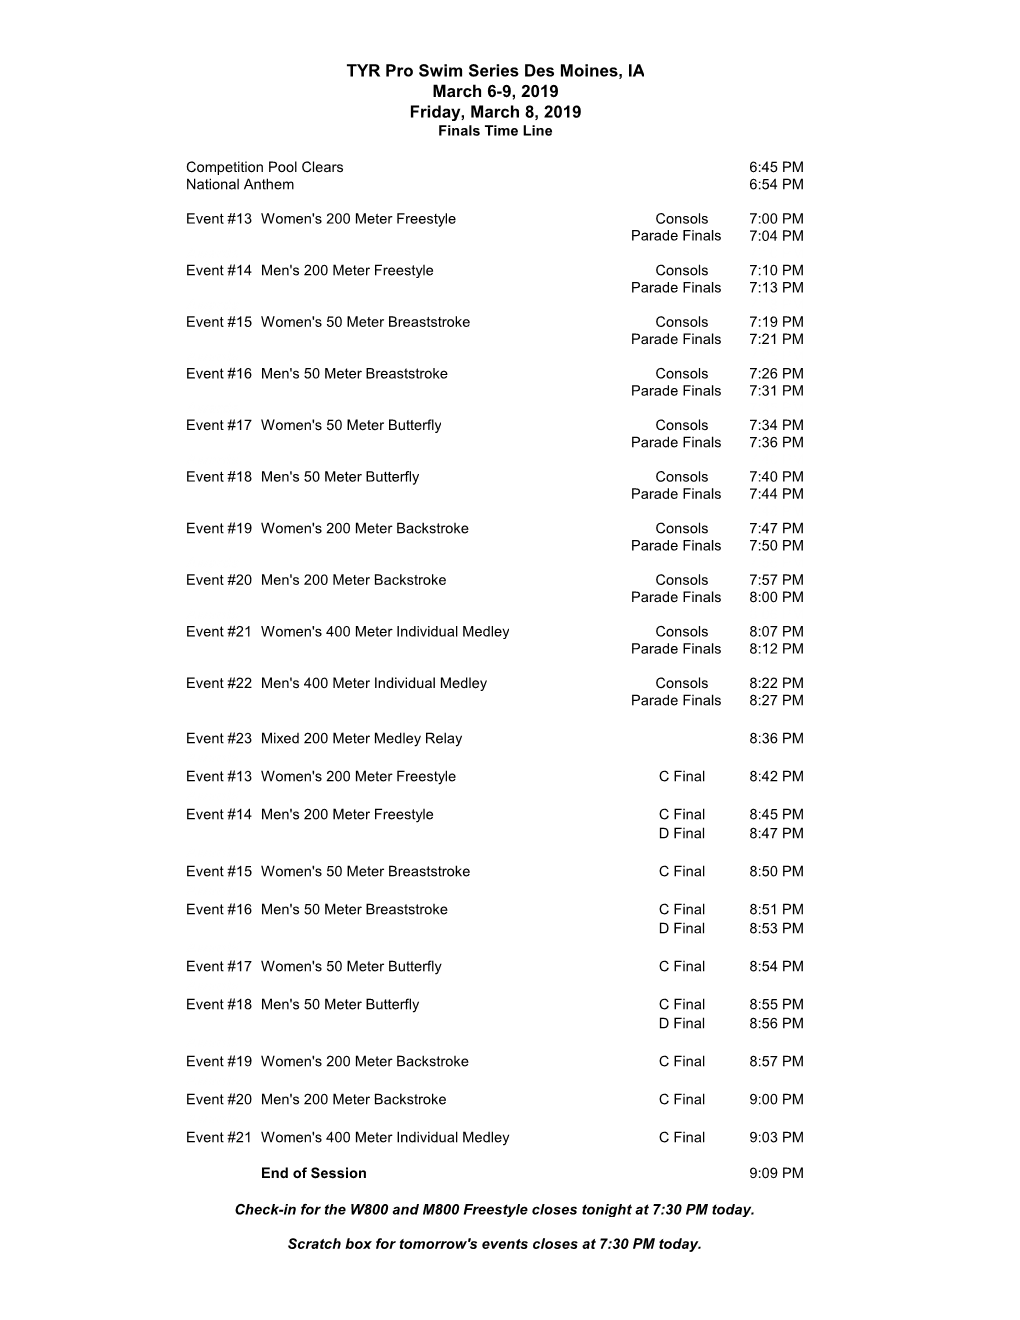 TYR Pro Swim Series Des Moines, IA March 6-9, 2019 Friday, March 8, 2019 Finals Time Line